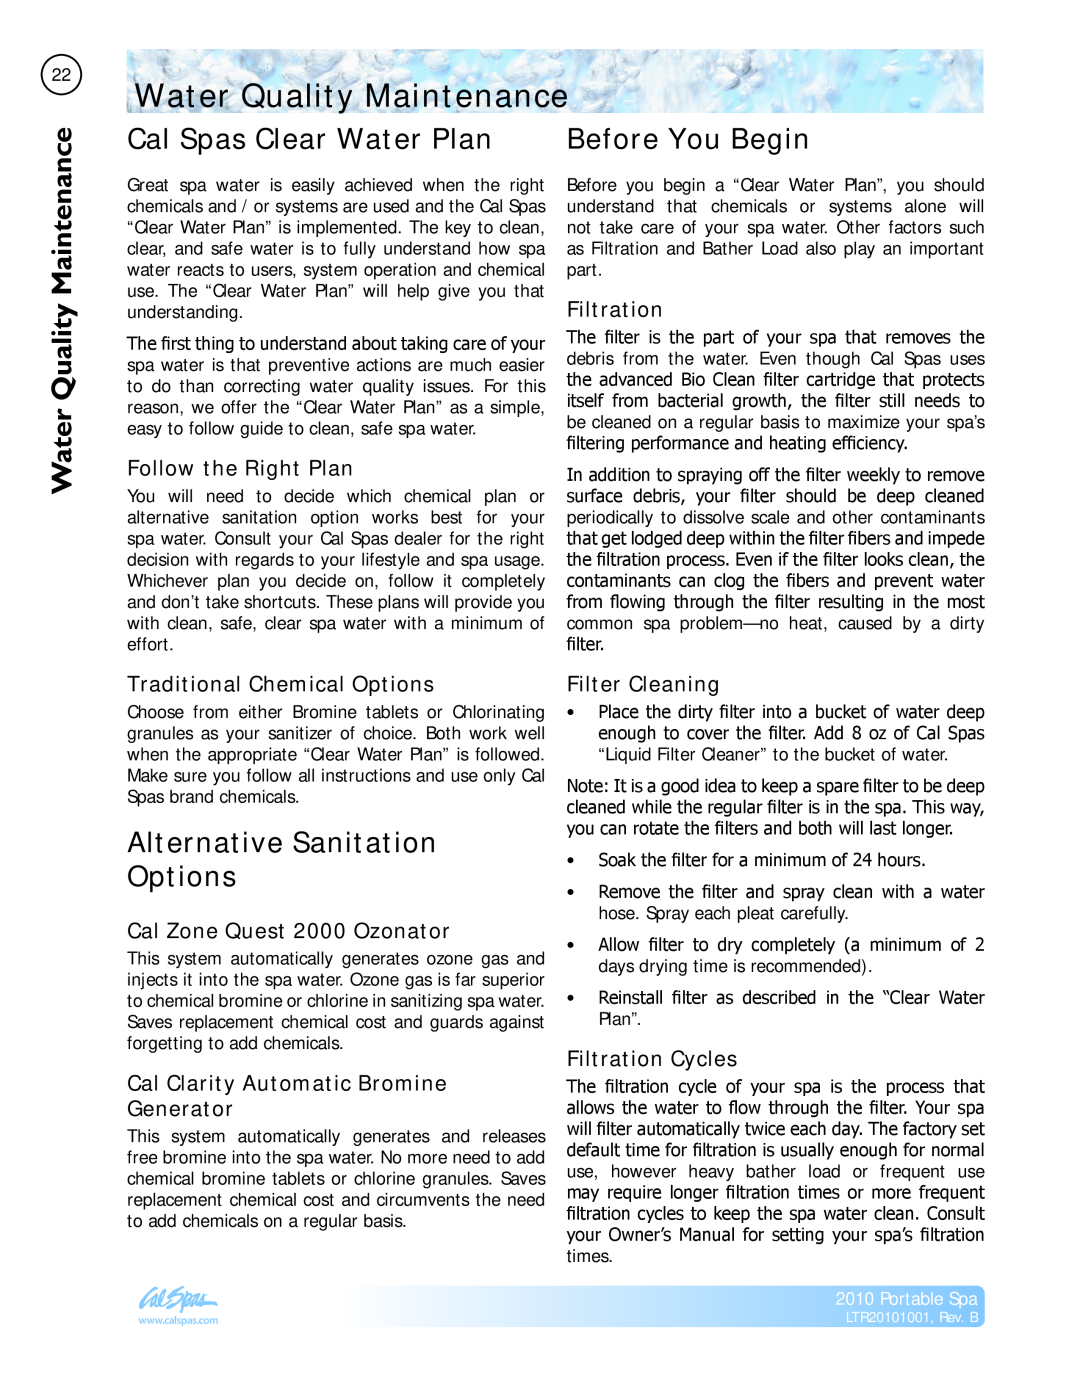 Cal Spas LTR20101001 manual Water Quality Maintenance, Cal Spas Clear Water Plan, Before You Begin, Follow the Right Plan 